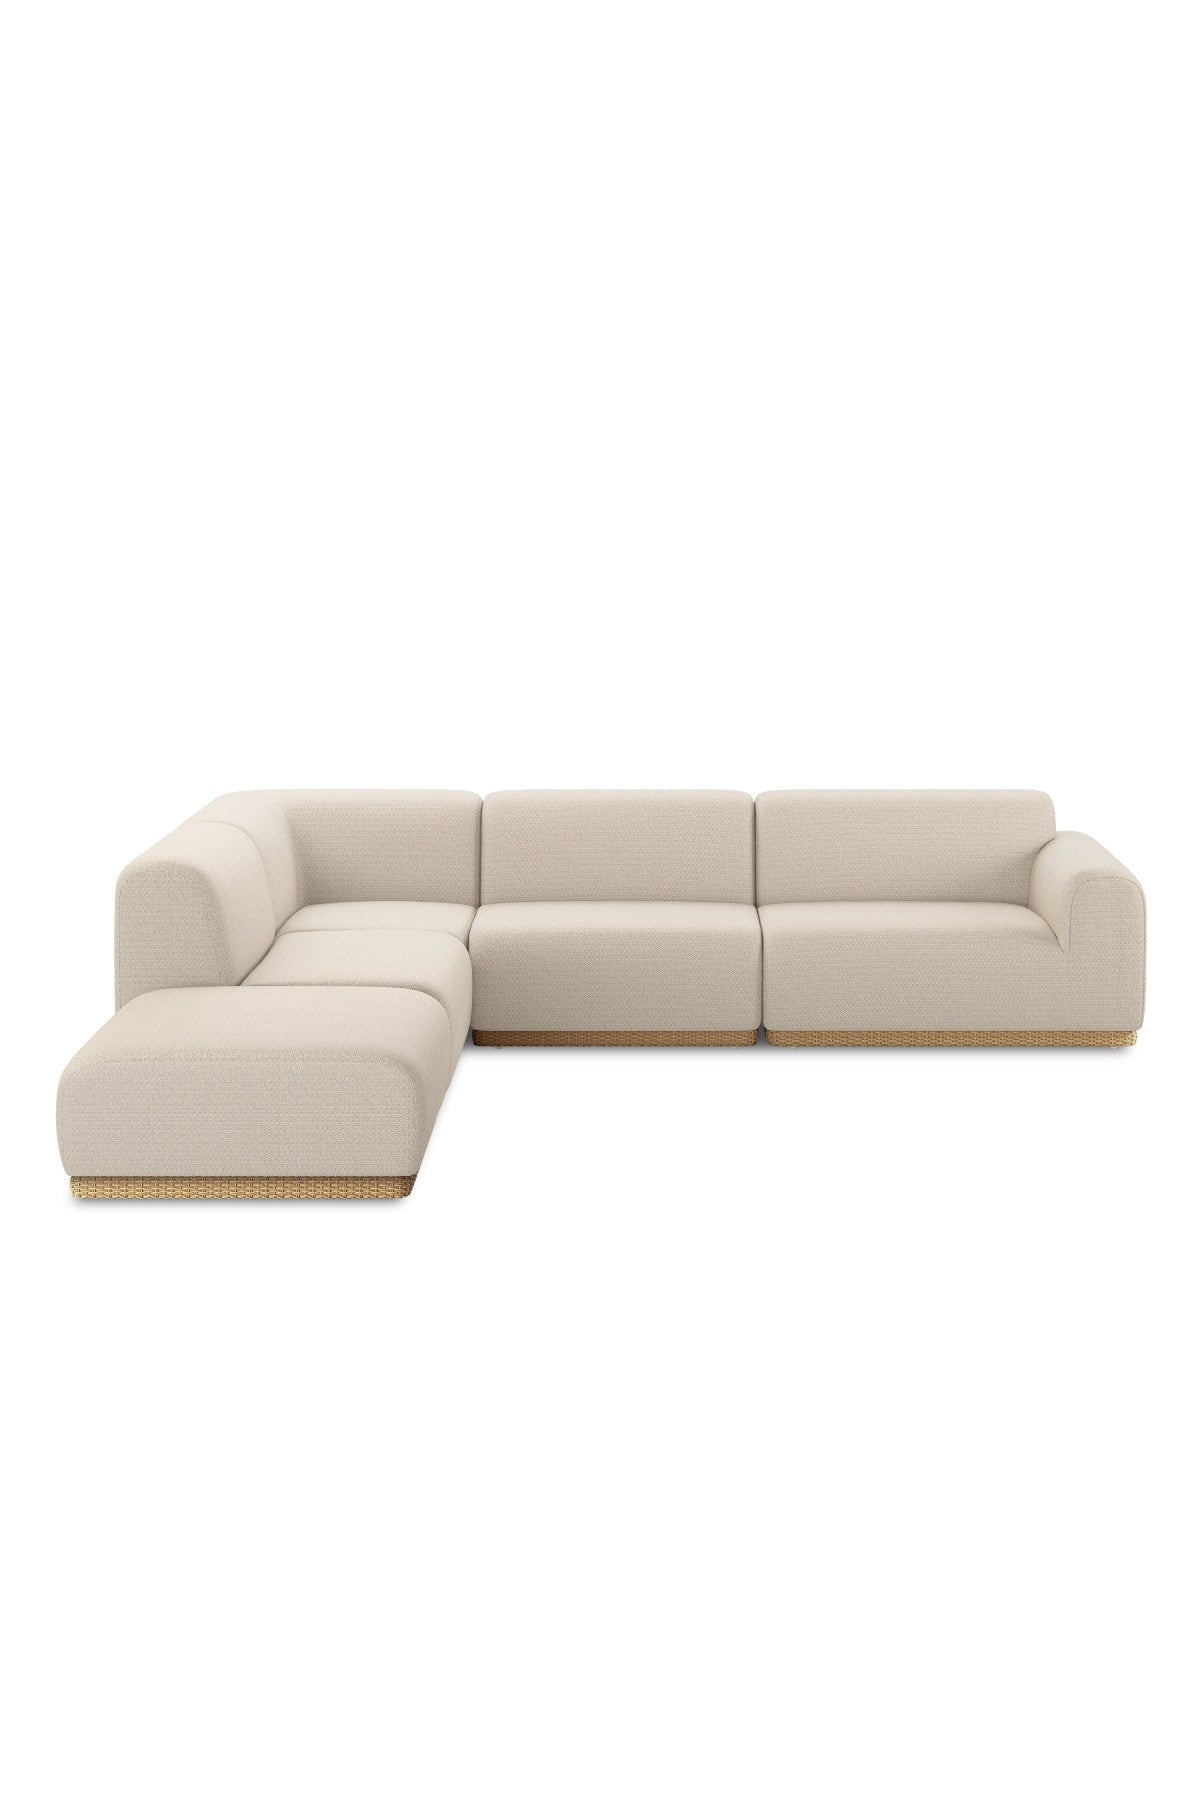 Romley Outdoor 4-Piece Sectional with Ottoman - 2 Styles